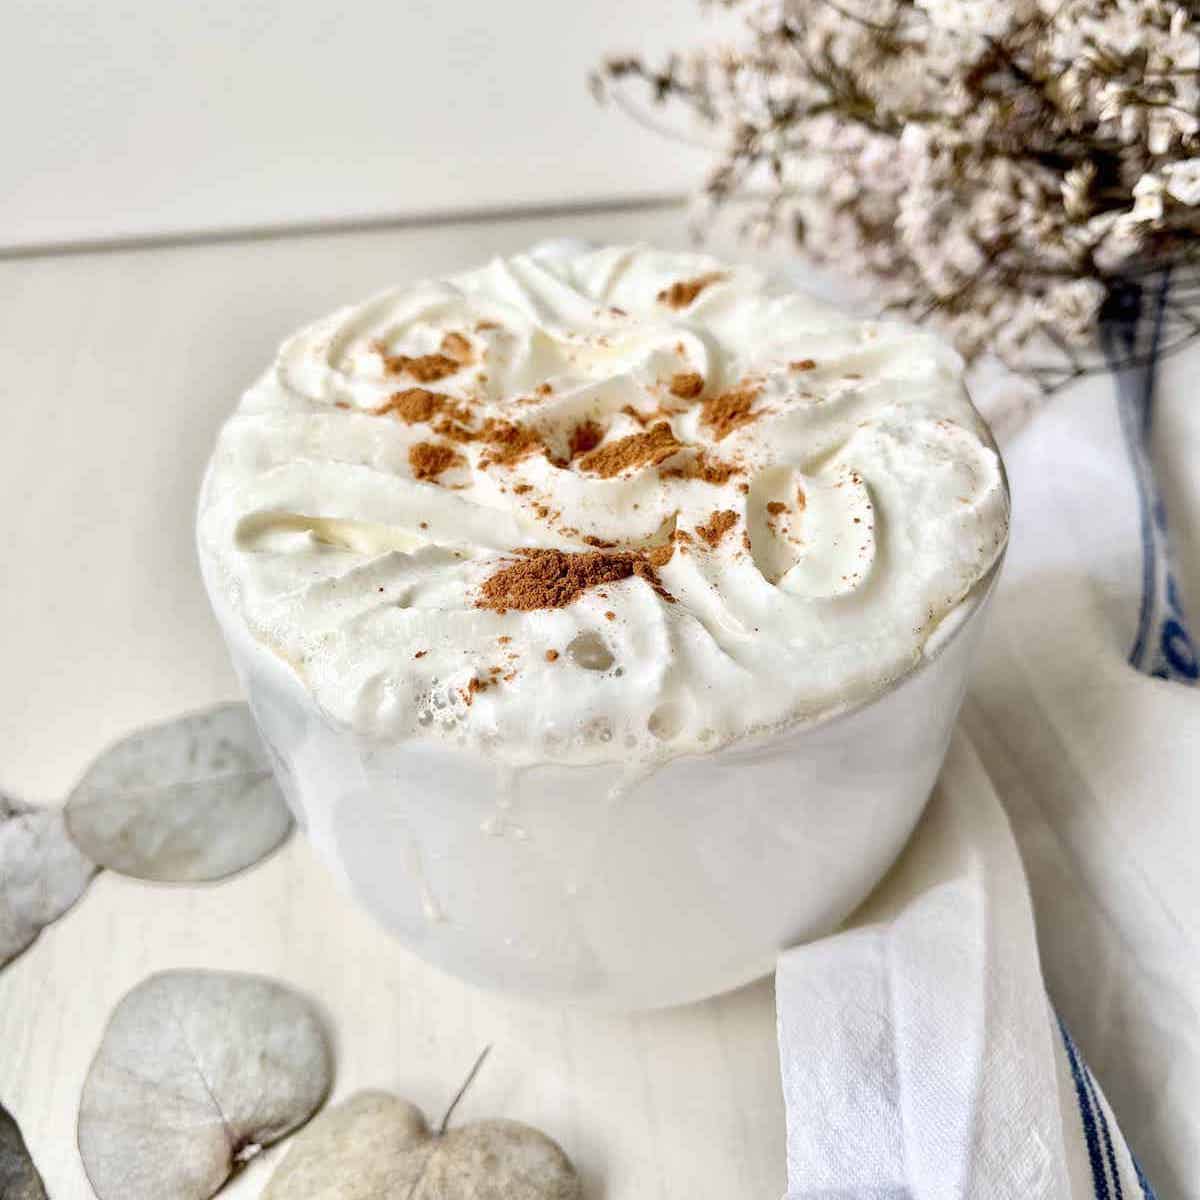 A cosy cup of peanut butter whipped cream topped with cinnamon sprinkle and cream.